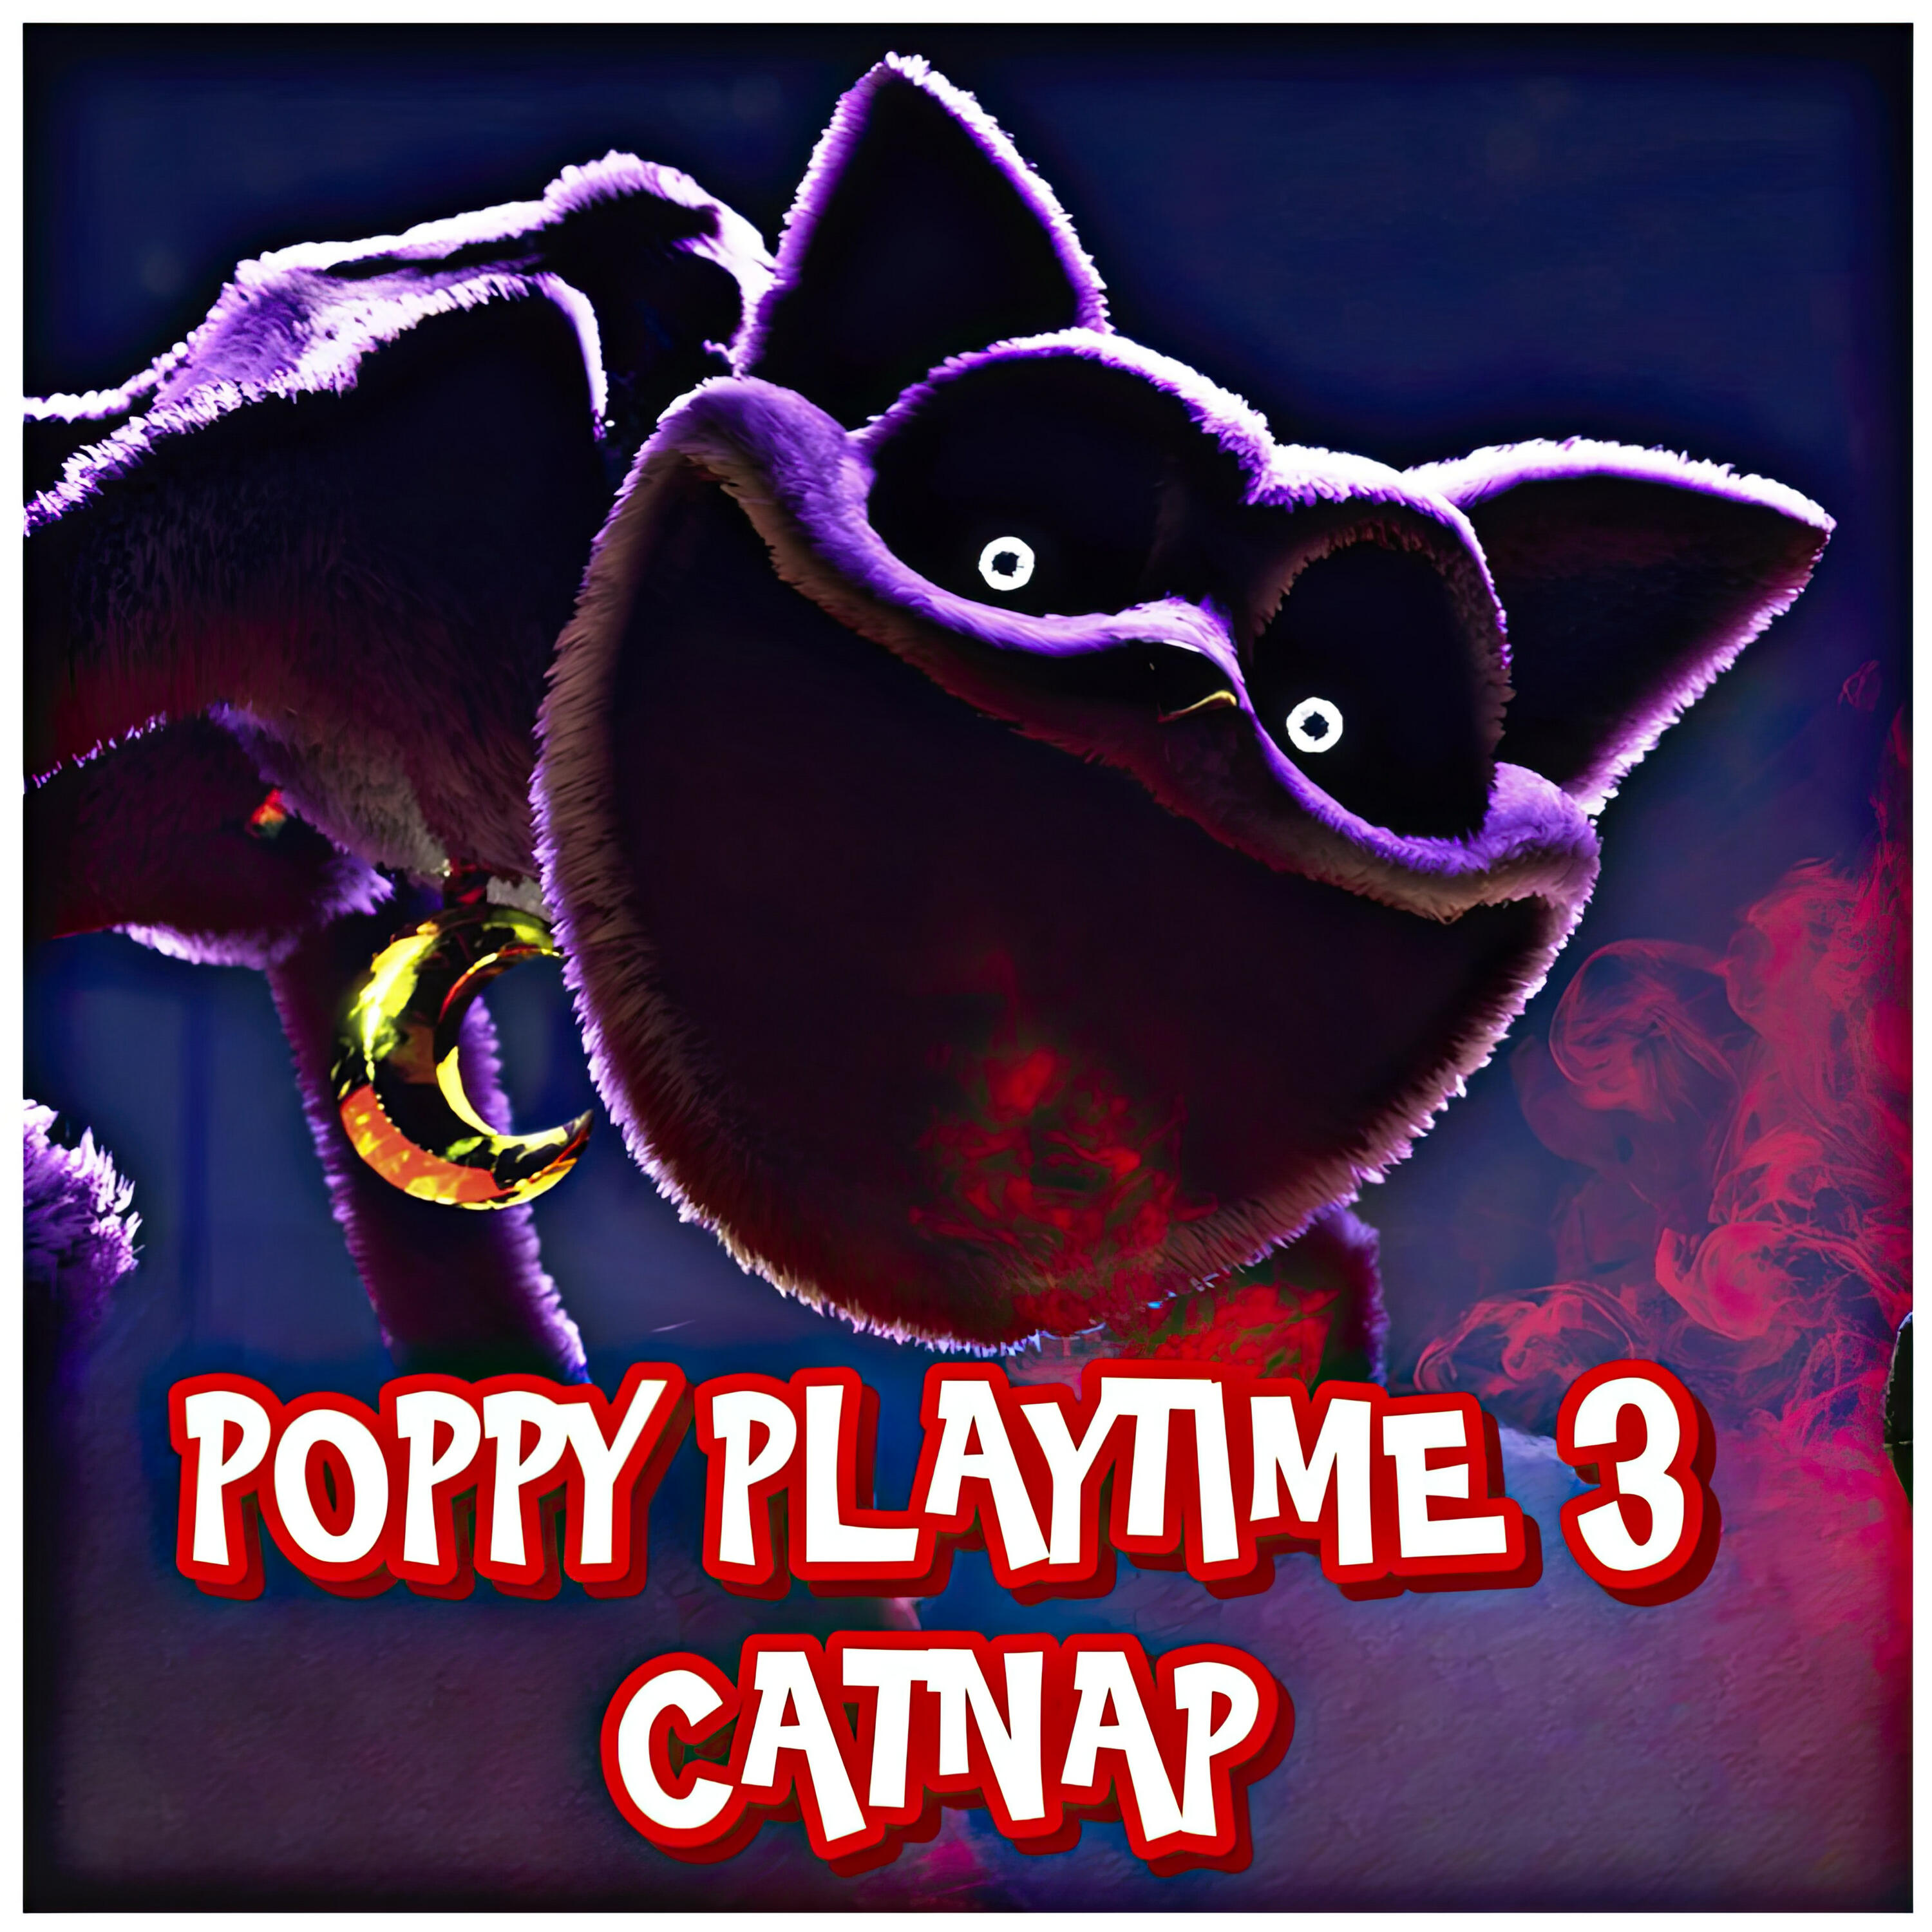 Poppy Playtime Song (Chapter 2) - Mommy Long Legs by iTownGameplay